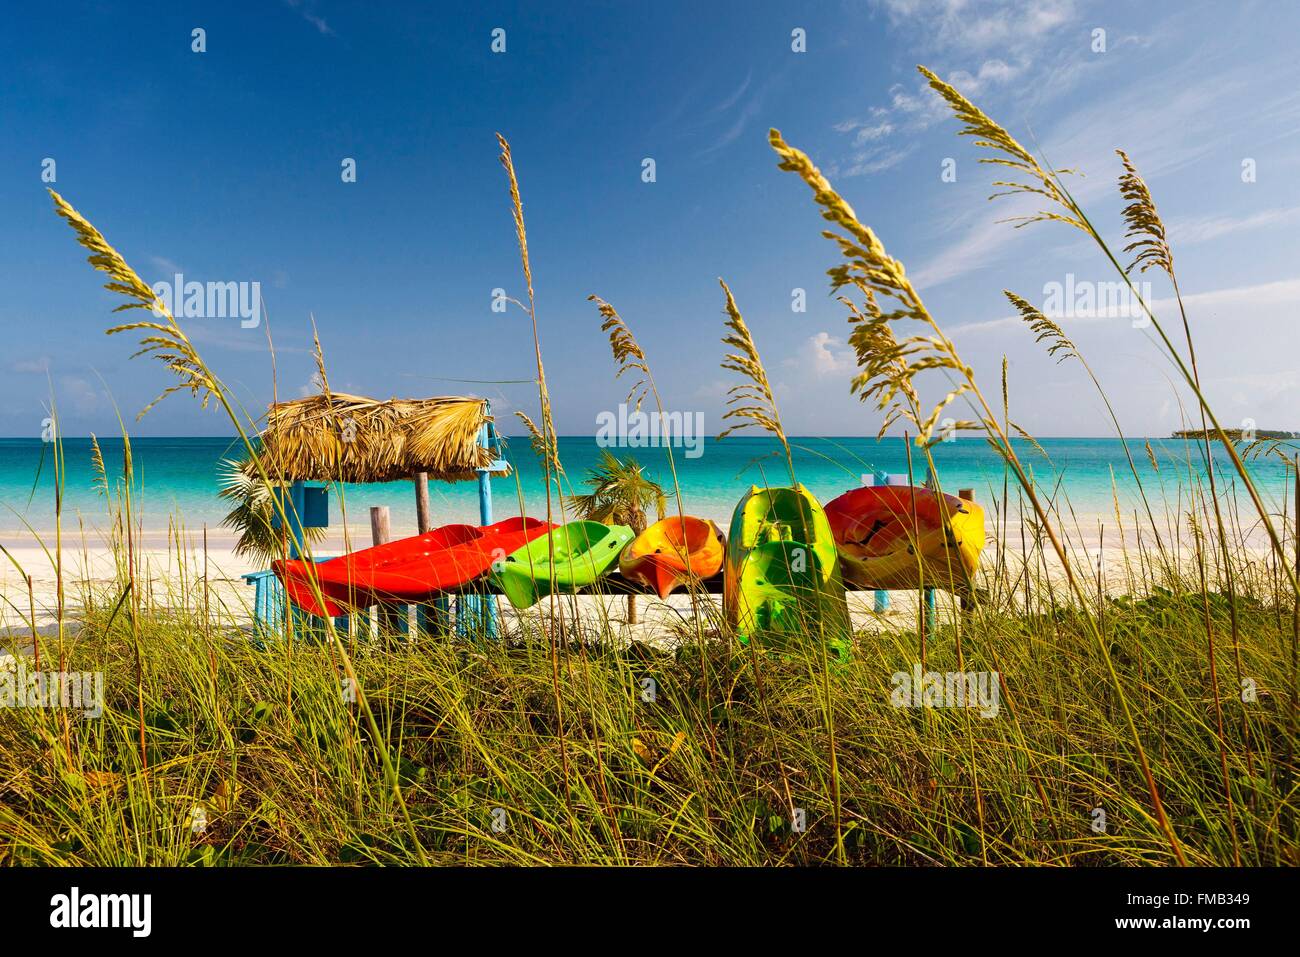 Cuba, Ciego de Avila, Jardines del Rey, Cayo Guillermo, View of beach with turquoise waters with colorful canoes Stock Photo